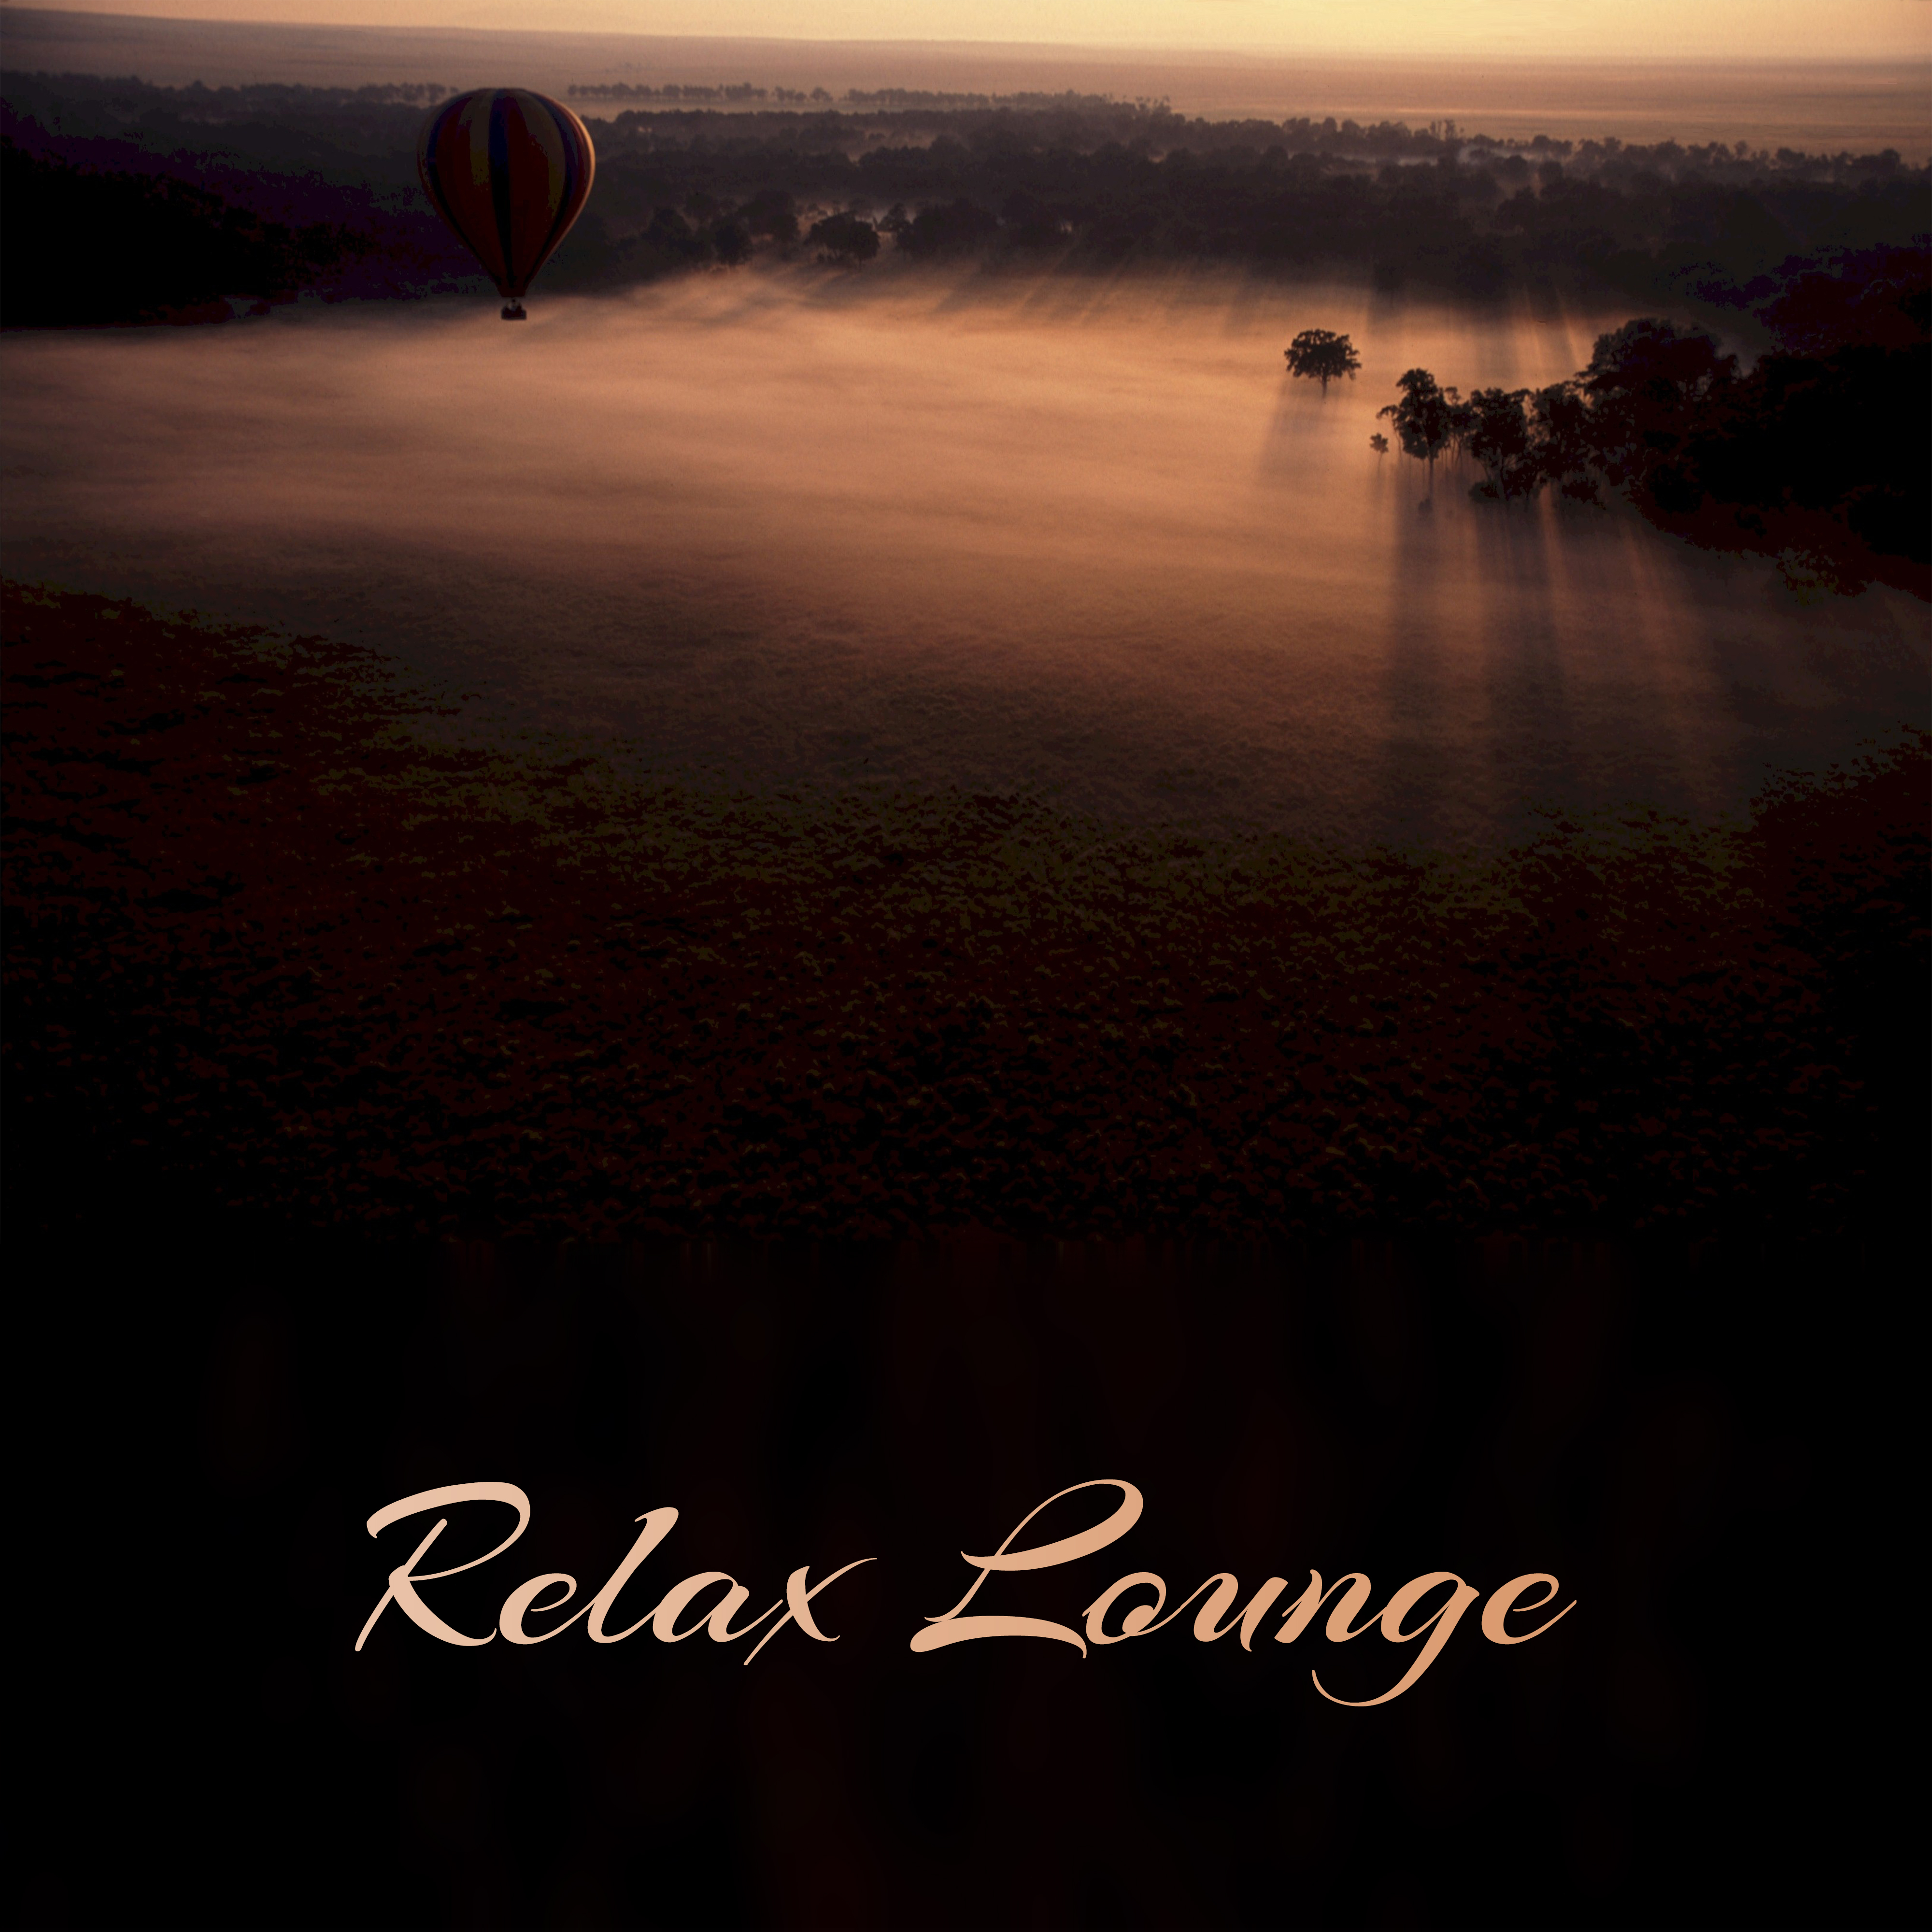 Relax Lounge – Calming Nature Sounds, Deep Relaxation, New Age Music, Pure Rest at Home